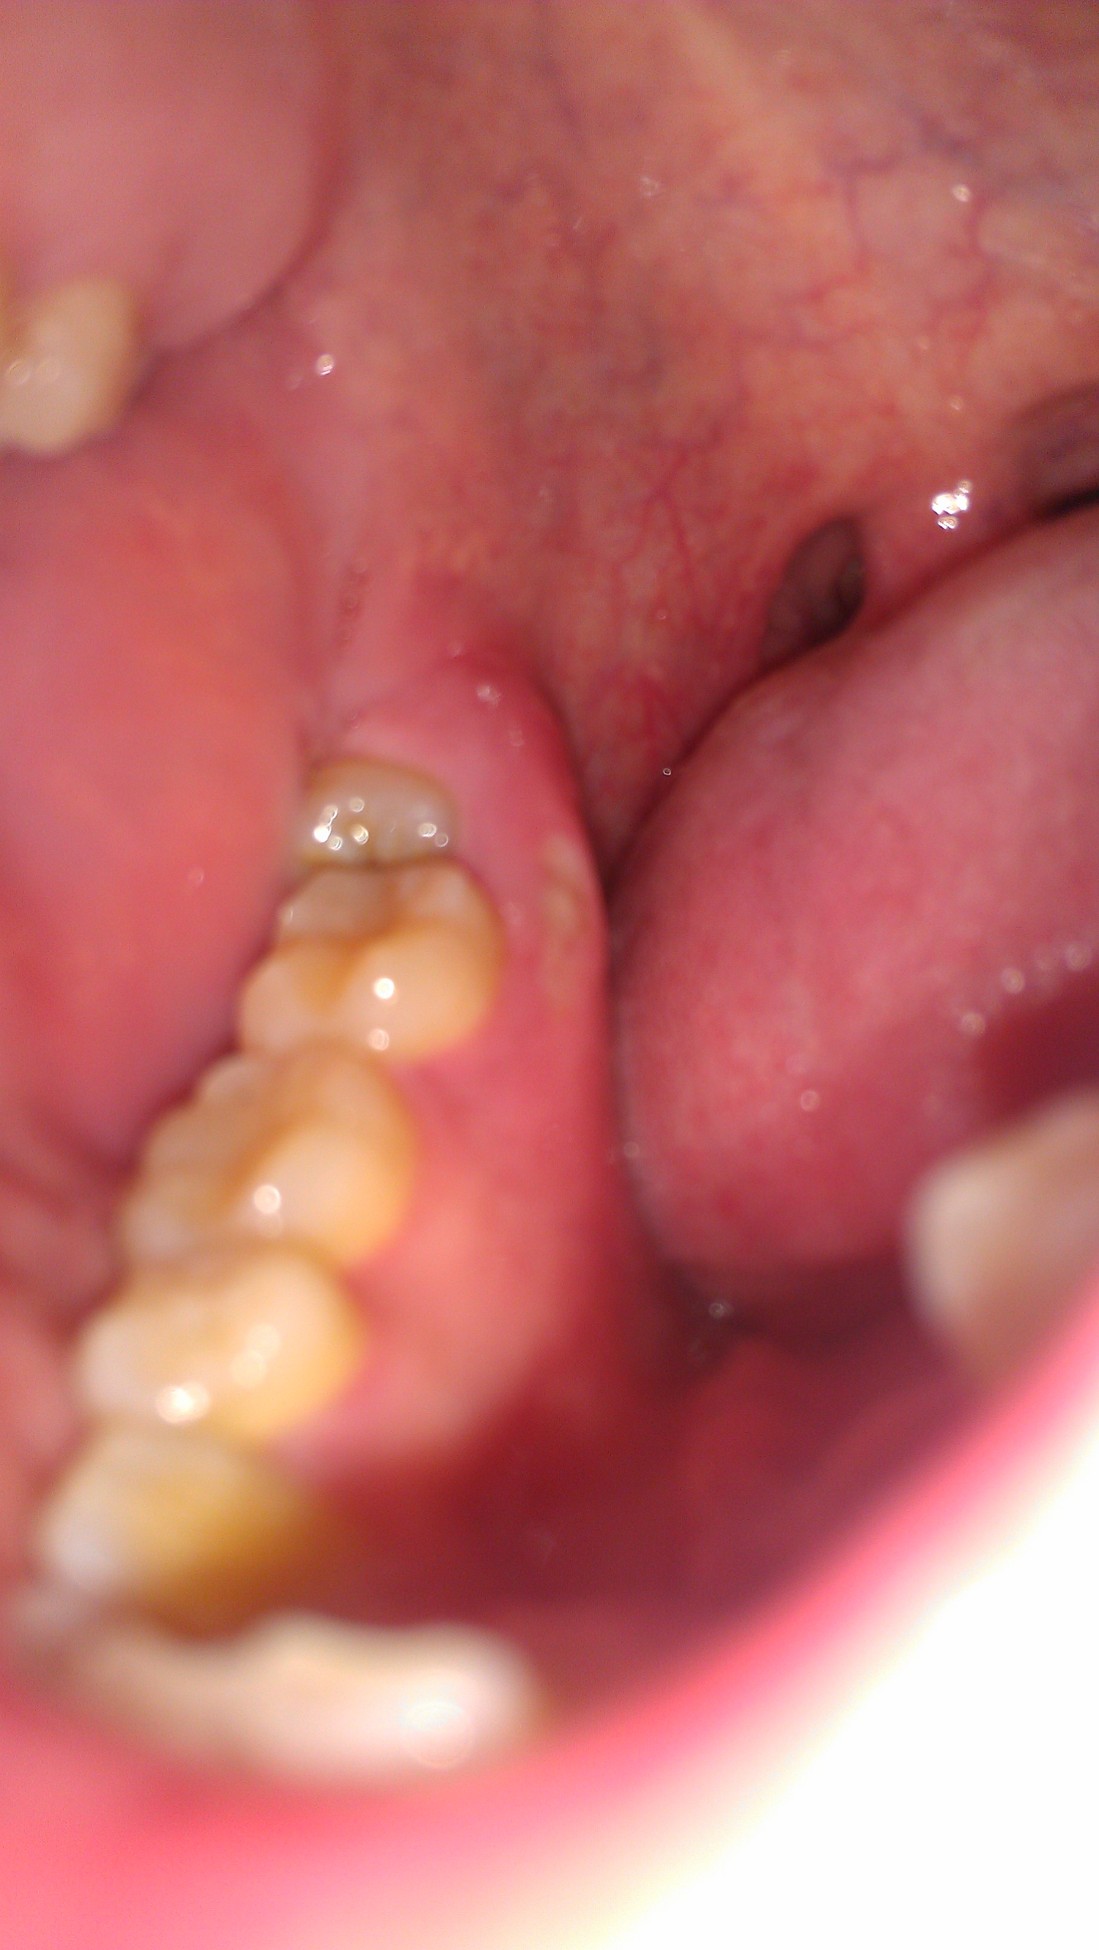 hard-lump-on-gum-after-tooth-extraction